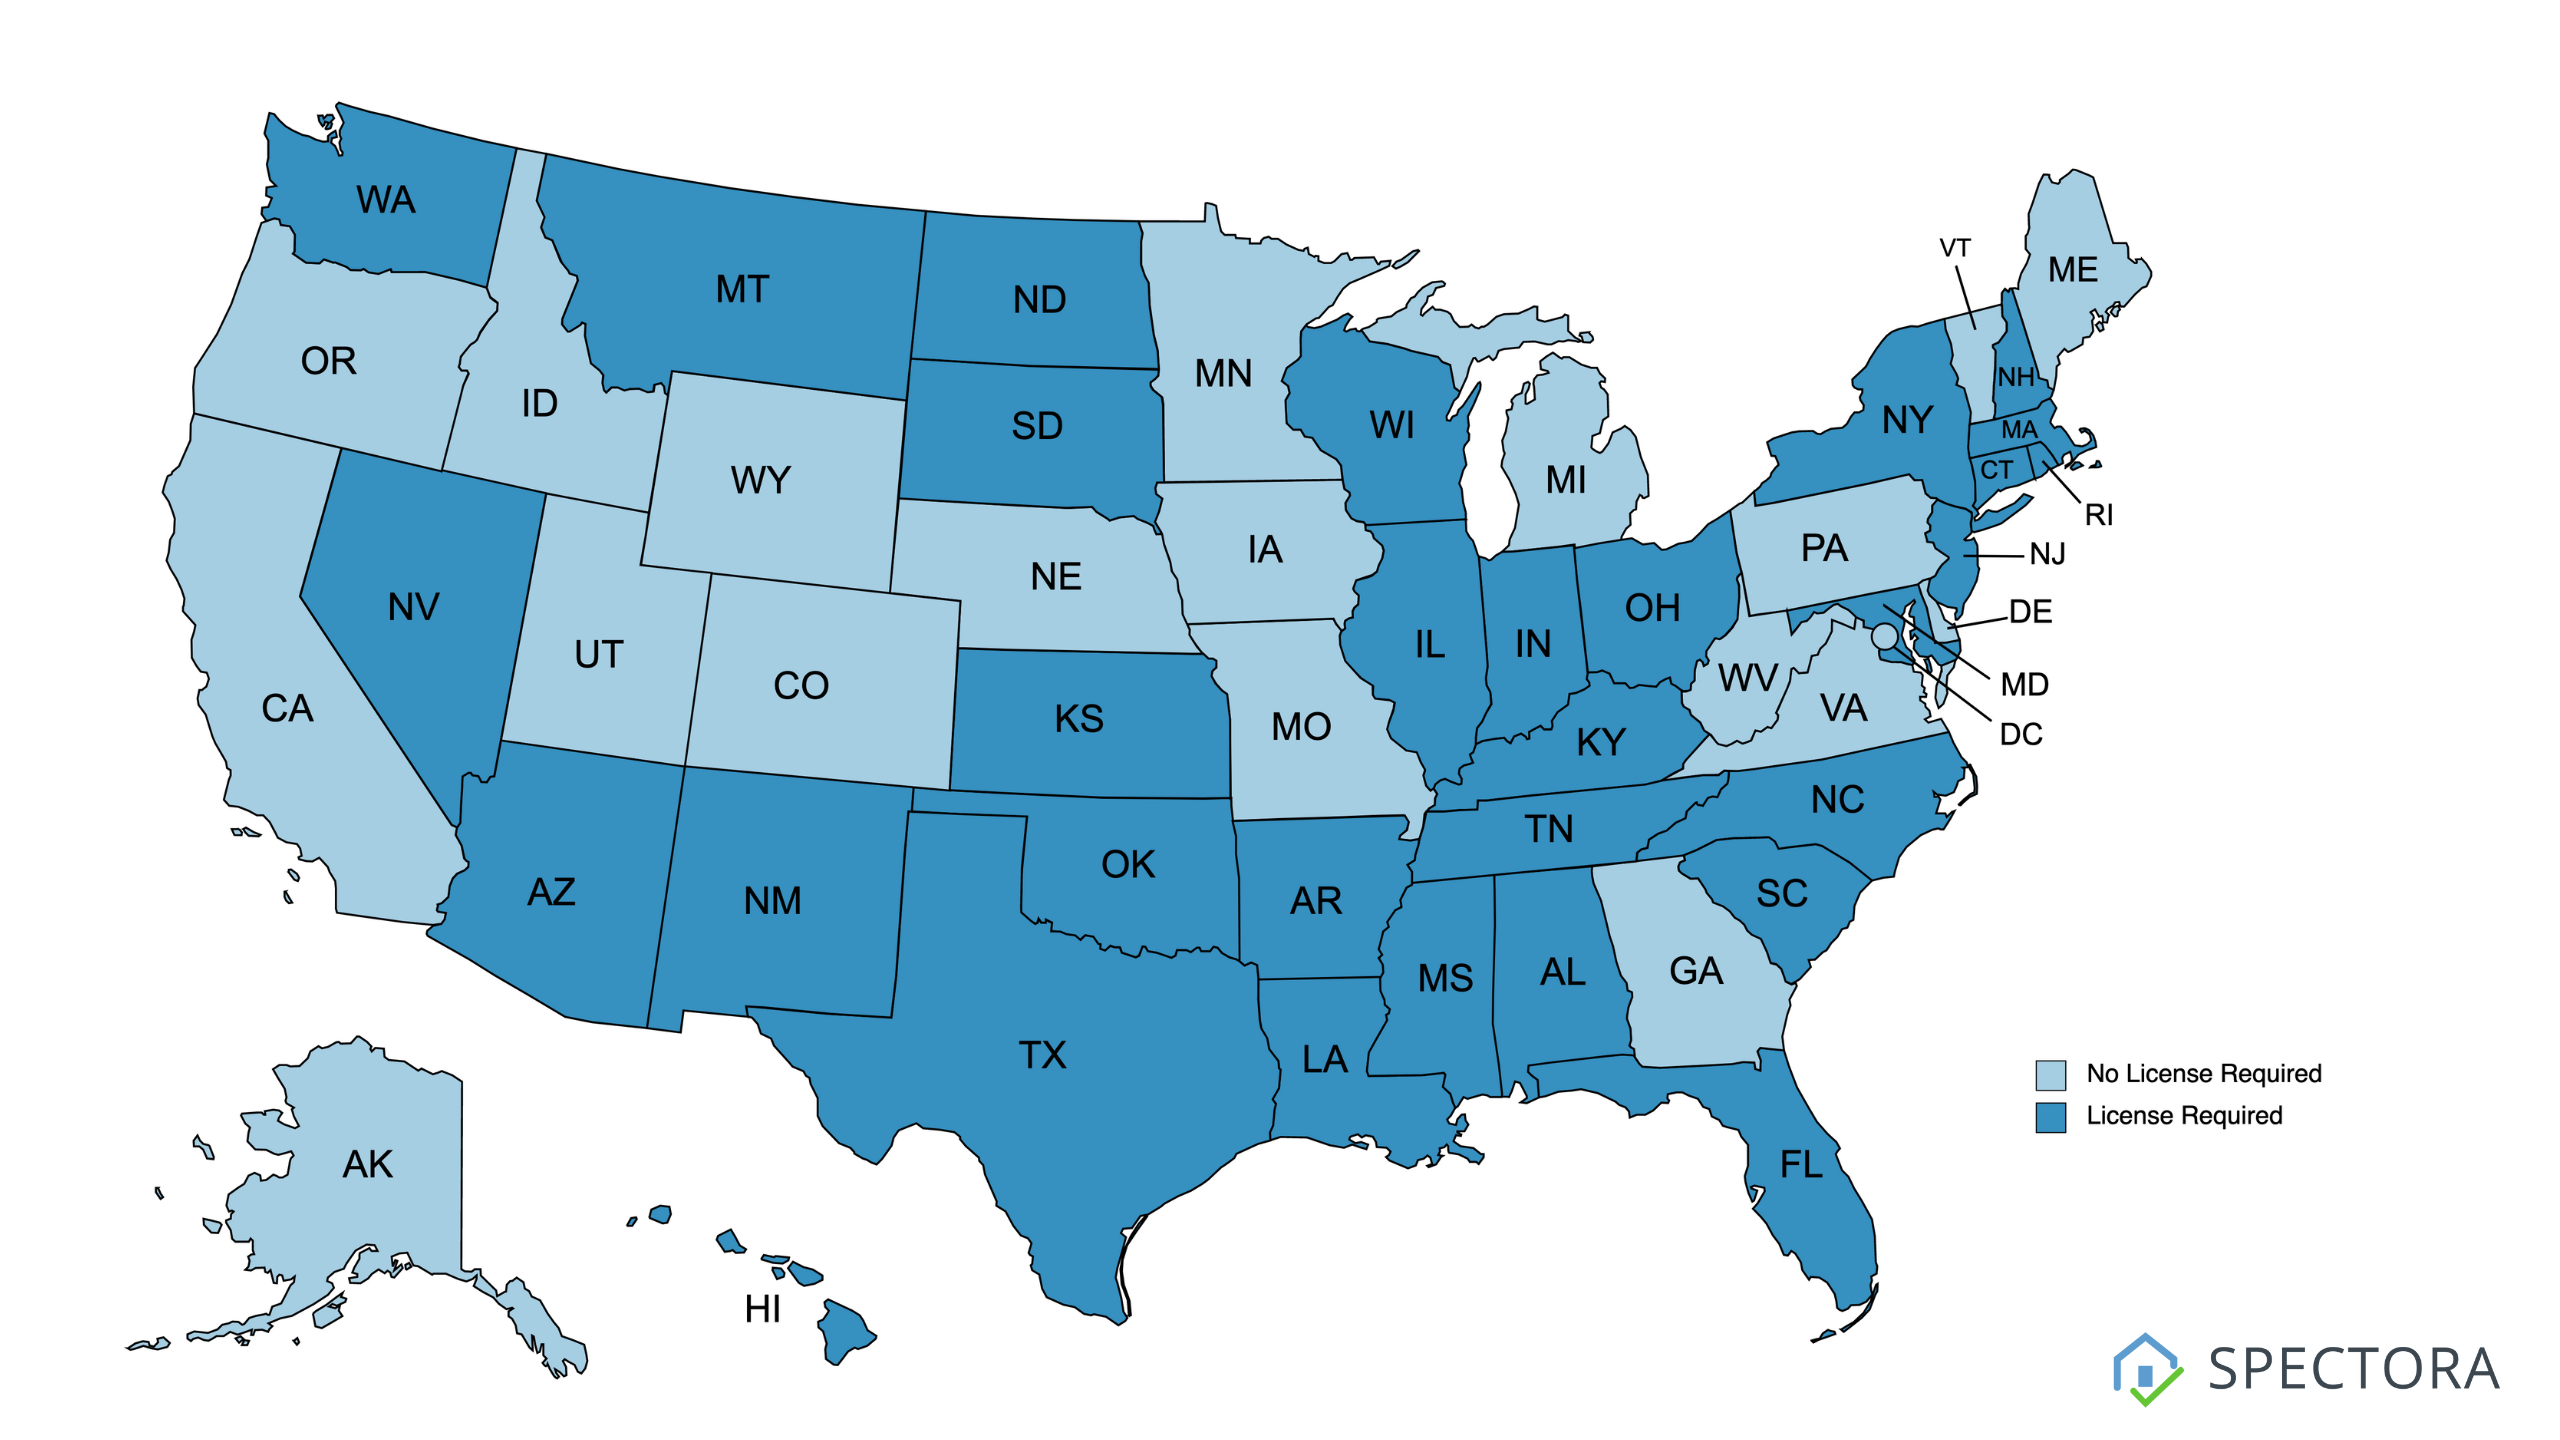 Map of the United States showing where home inspectors are required to get licensed.